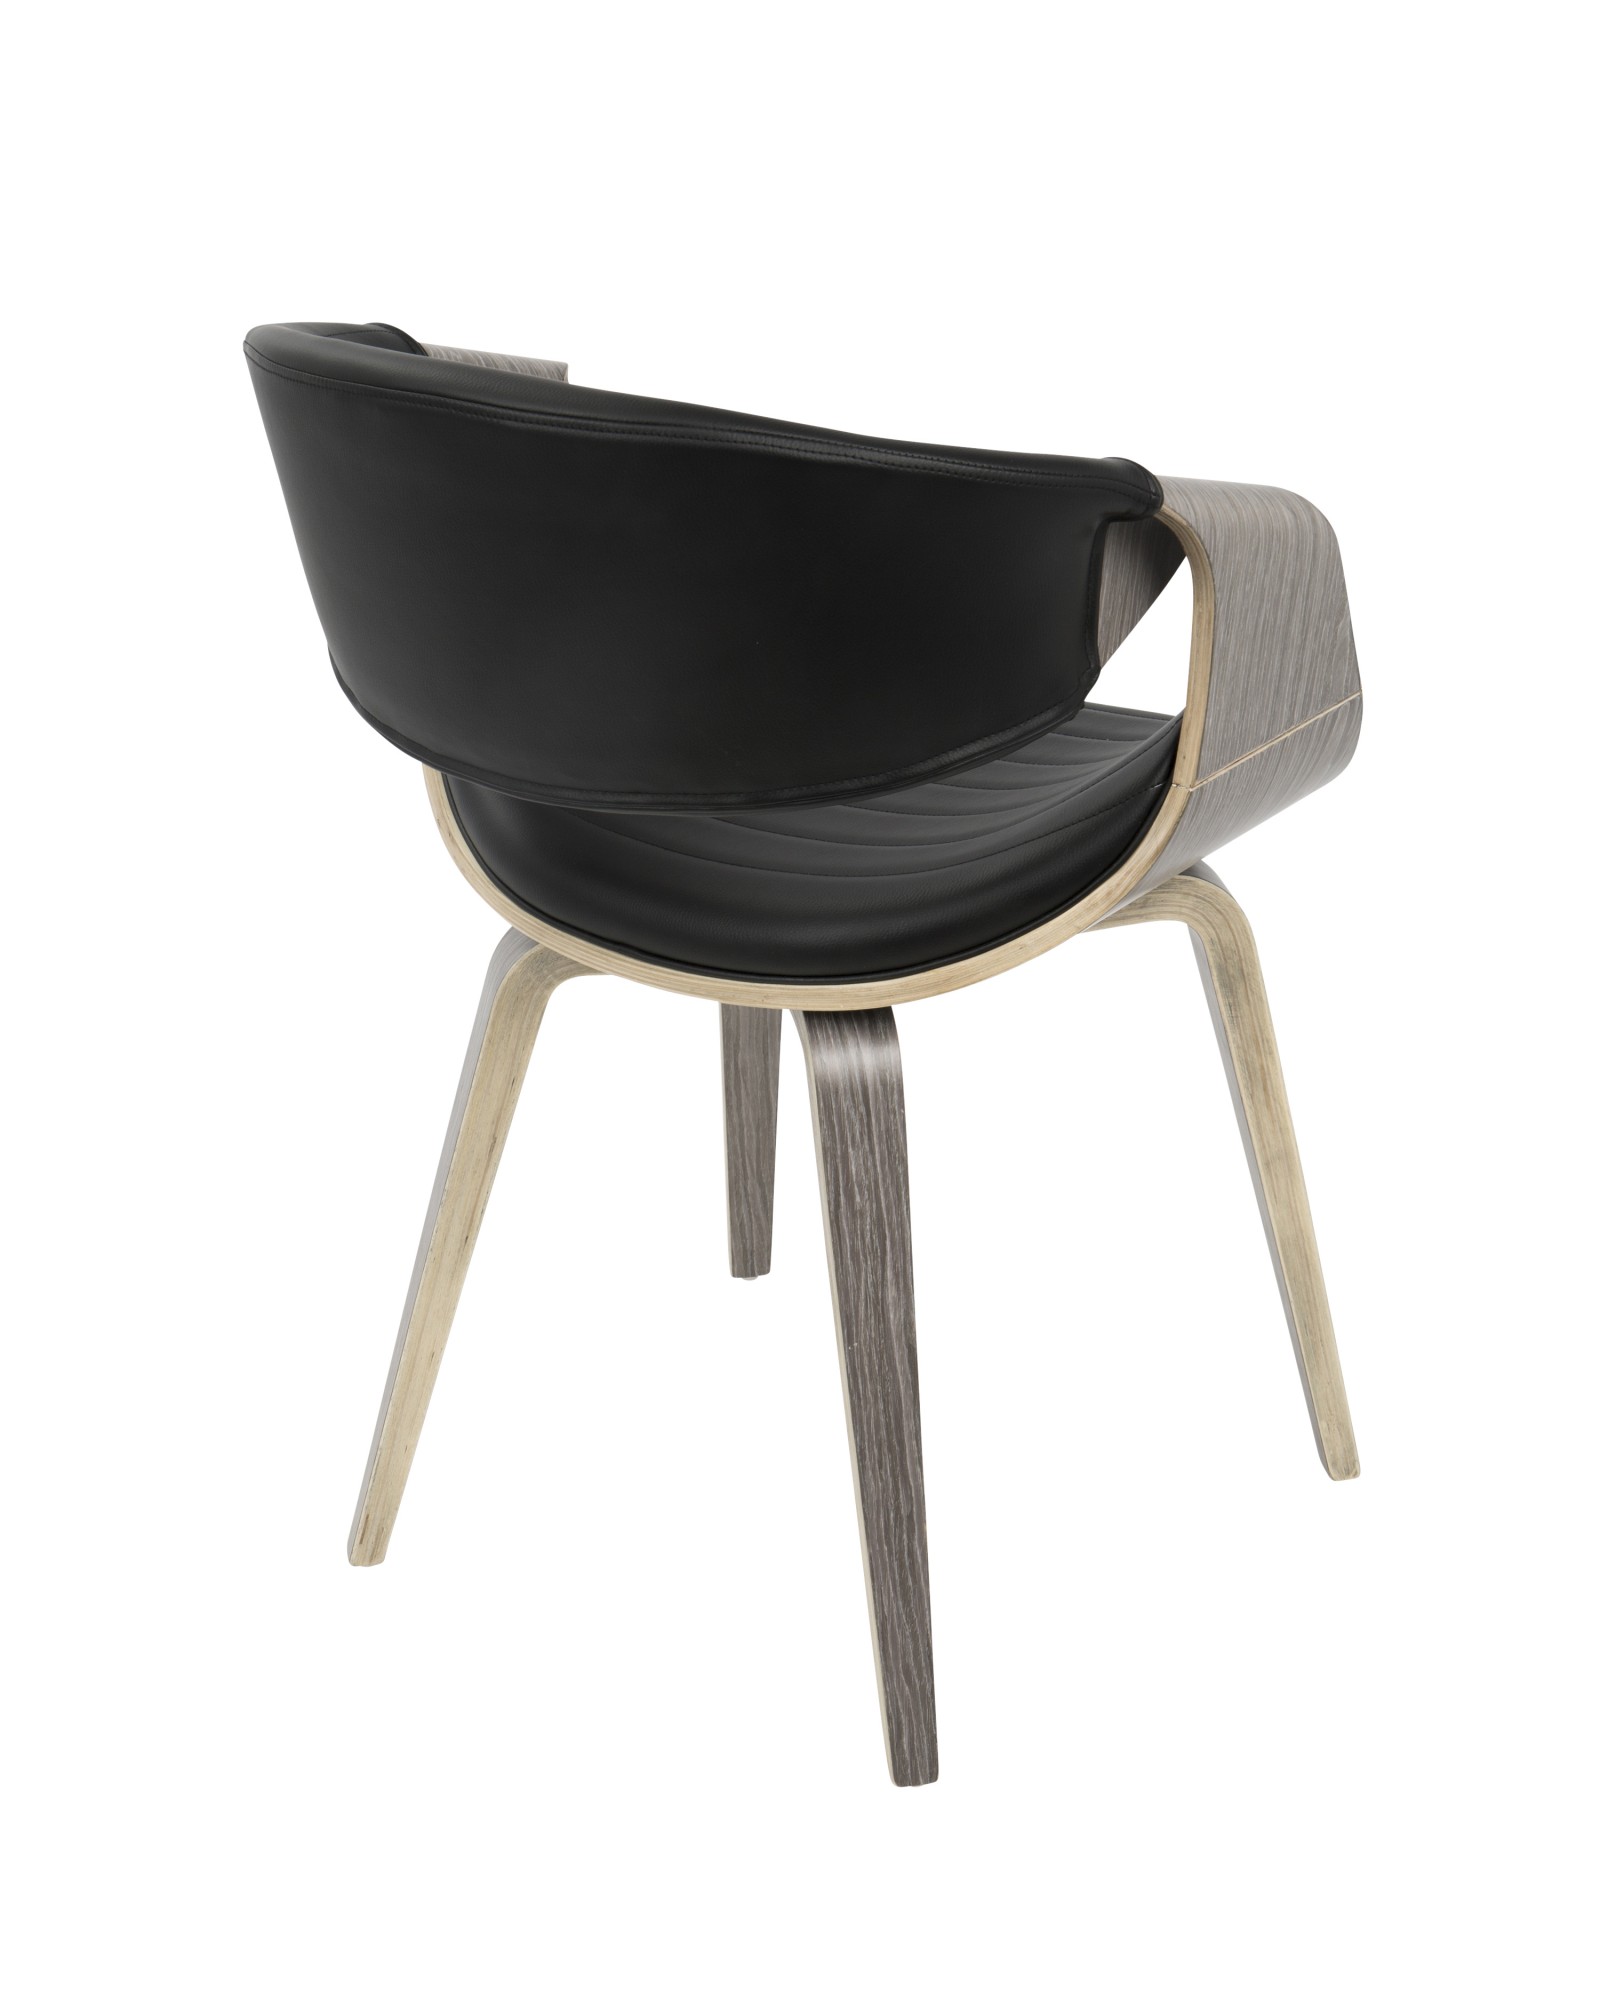 Symphony Mid-Century Modern Dining/Accent Chair in Light Grey Wood and Black Faux Leather